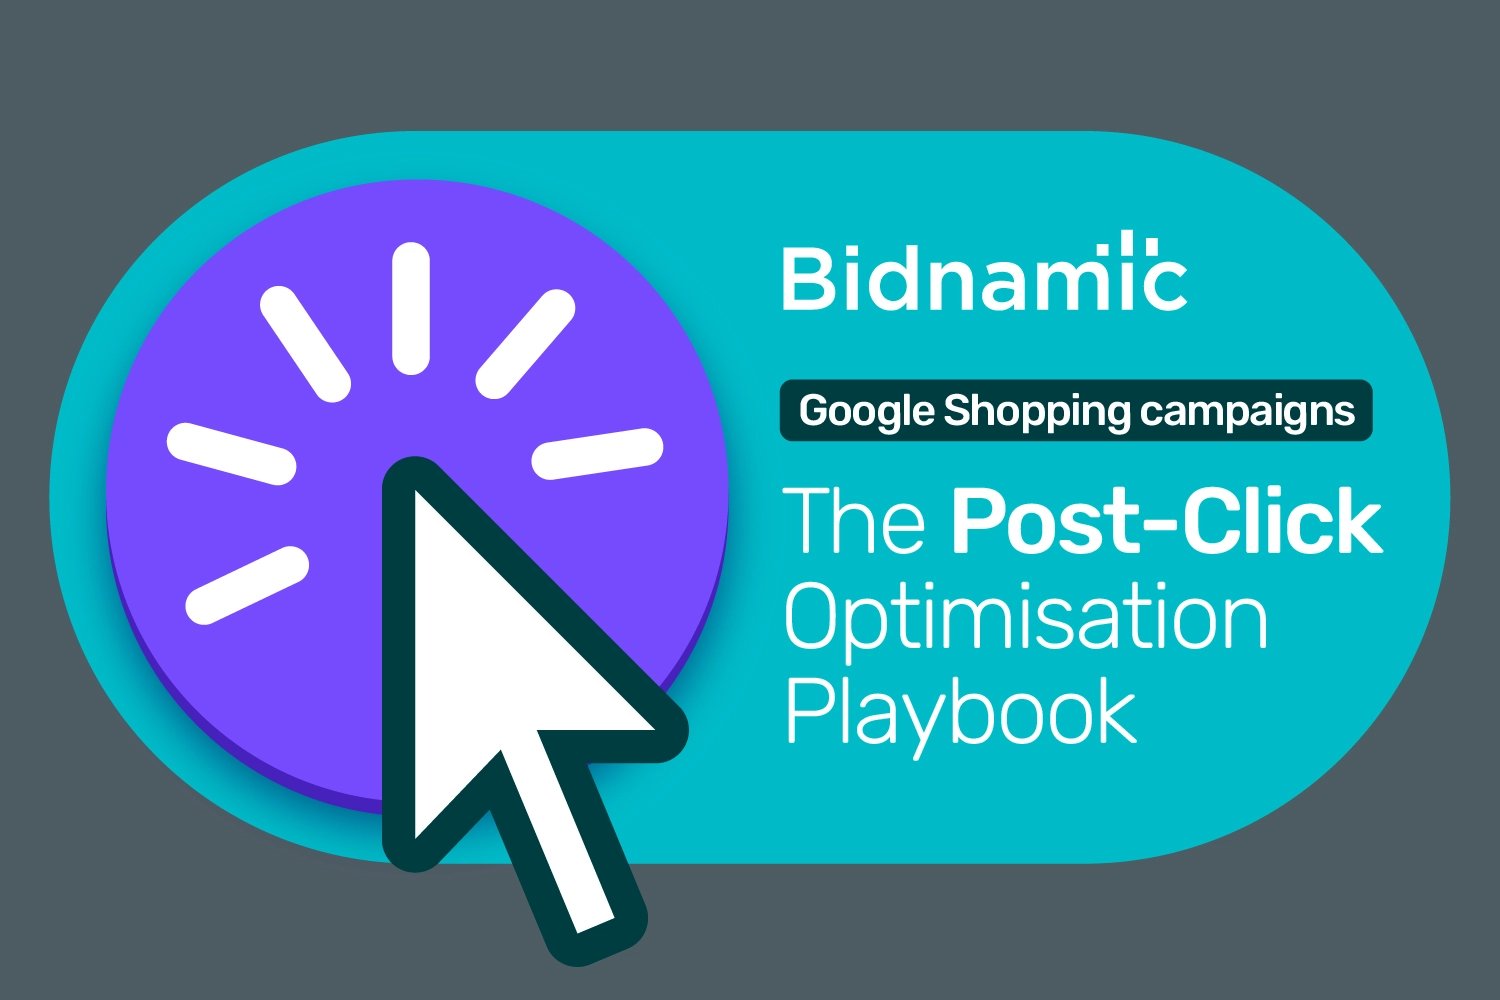 Image is the front cover of the pdf named The Post-Click Optimisation Playbook